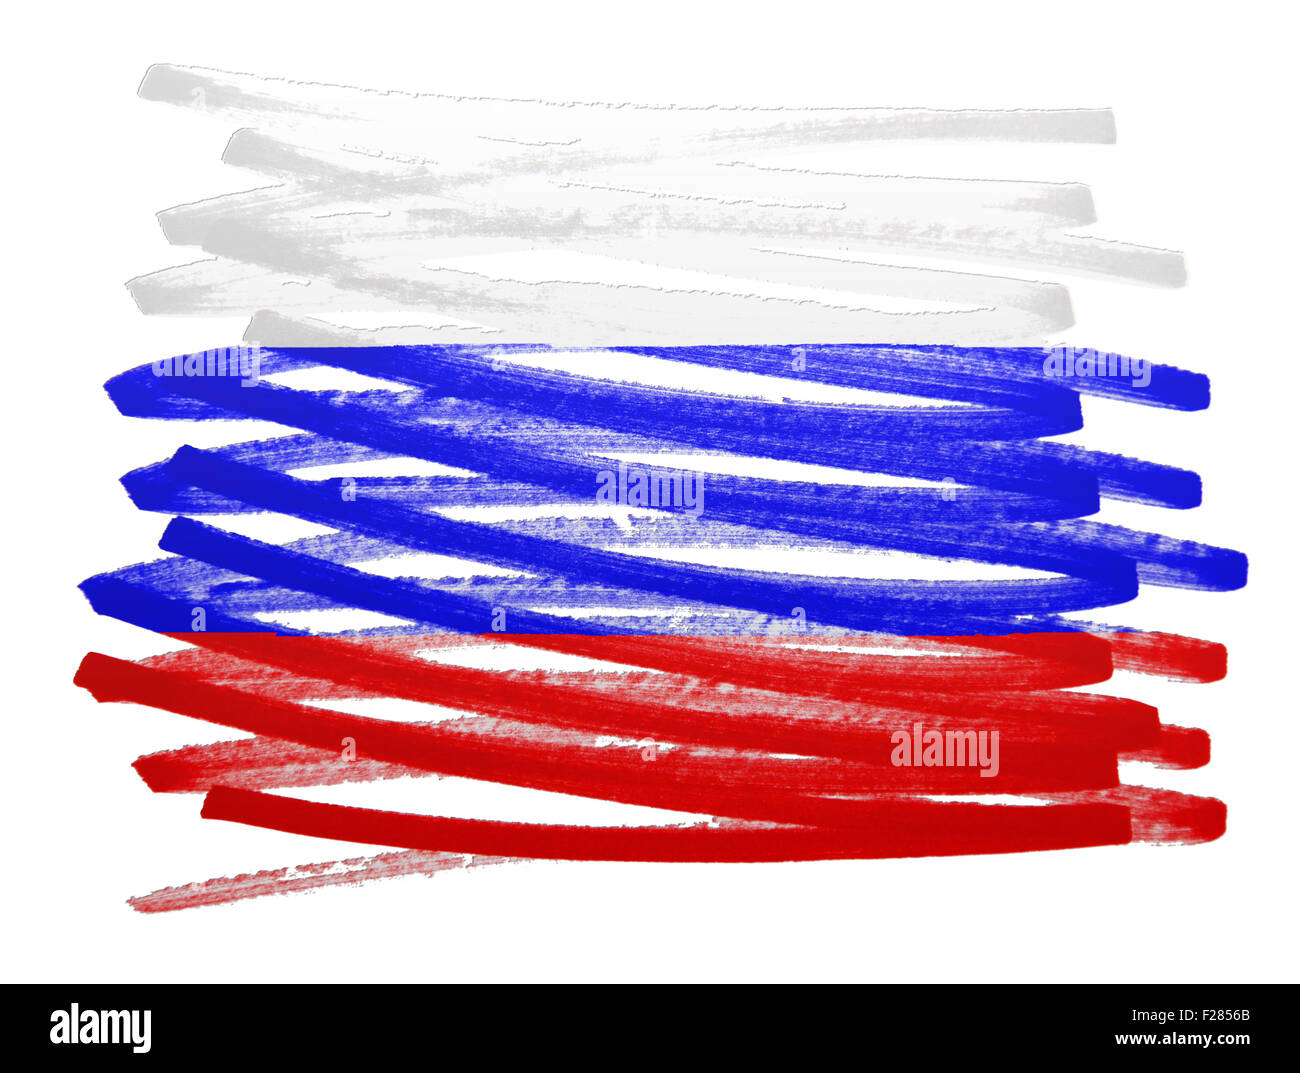 Flag illustration made with pen - Russia Stock Photo